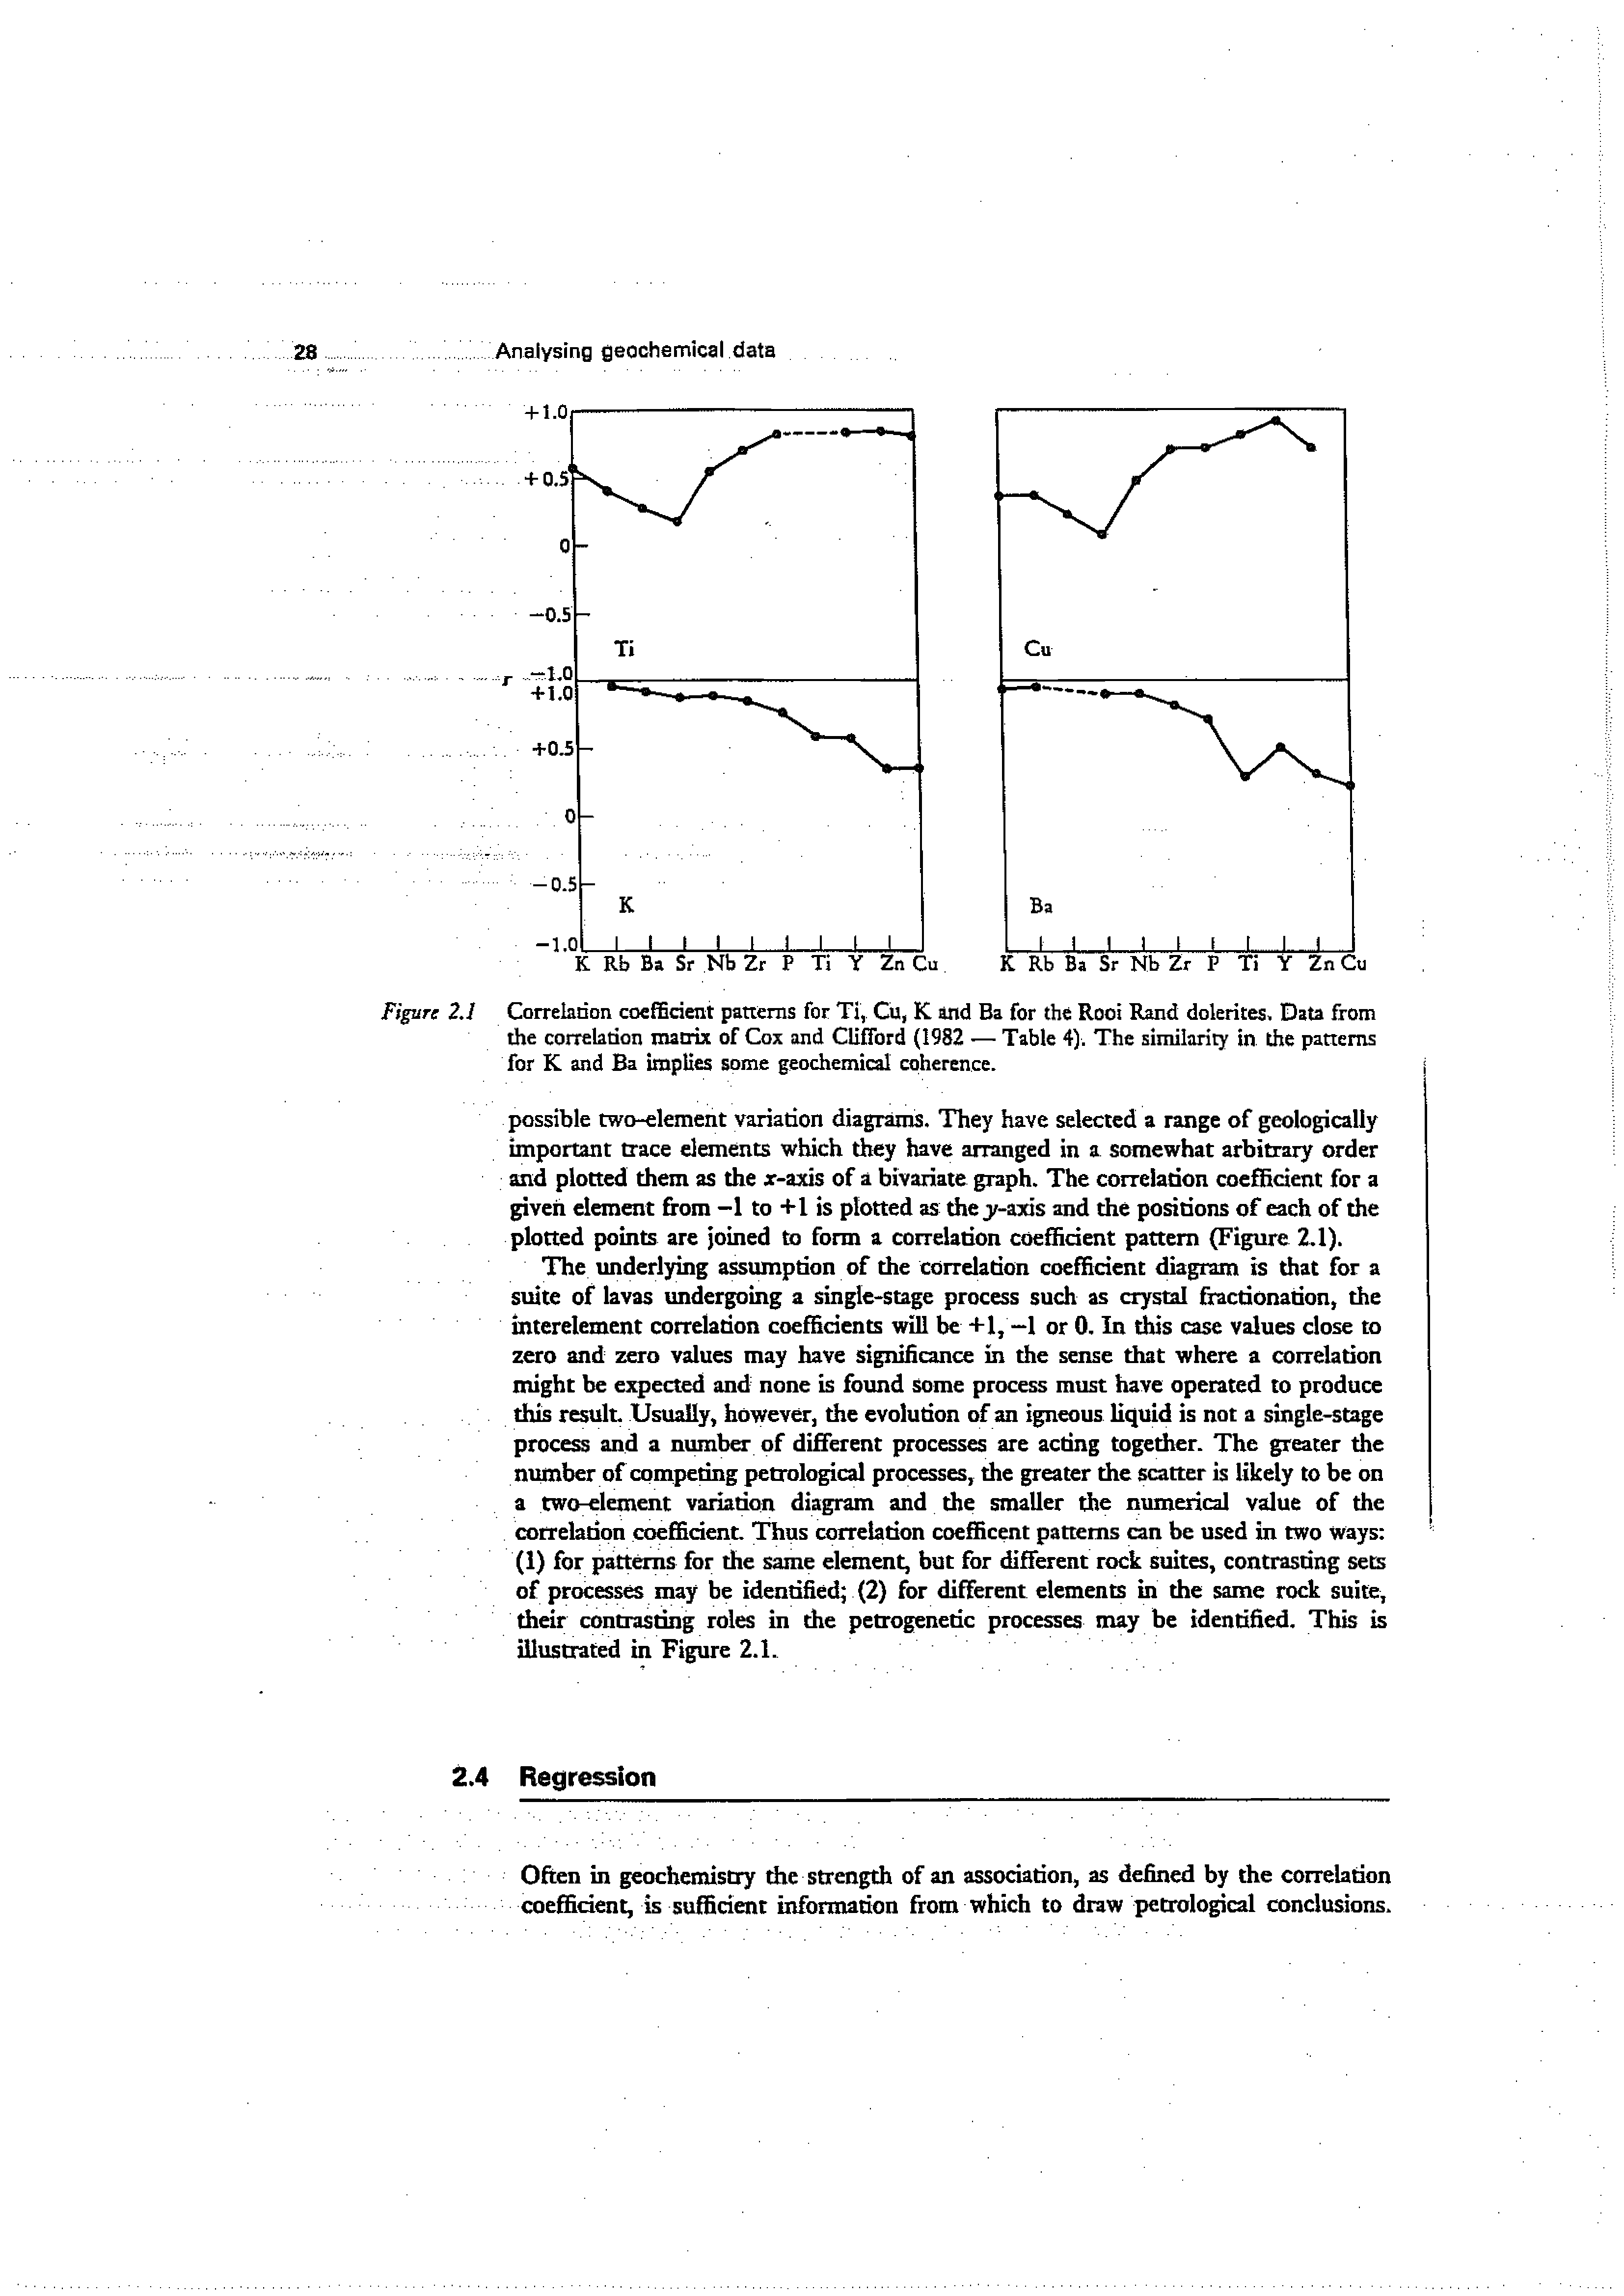 Figure 2.1 Correlation coefficient patterns for Ti, Cu, K and Ba for the Root Rand dolerites. Data from the correlation manix of Cox and Clifford (1982 — Table 4). The similarity in. the patterns for K and Ba implies some geochemical coherence.